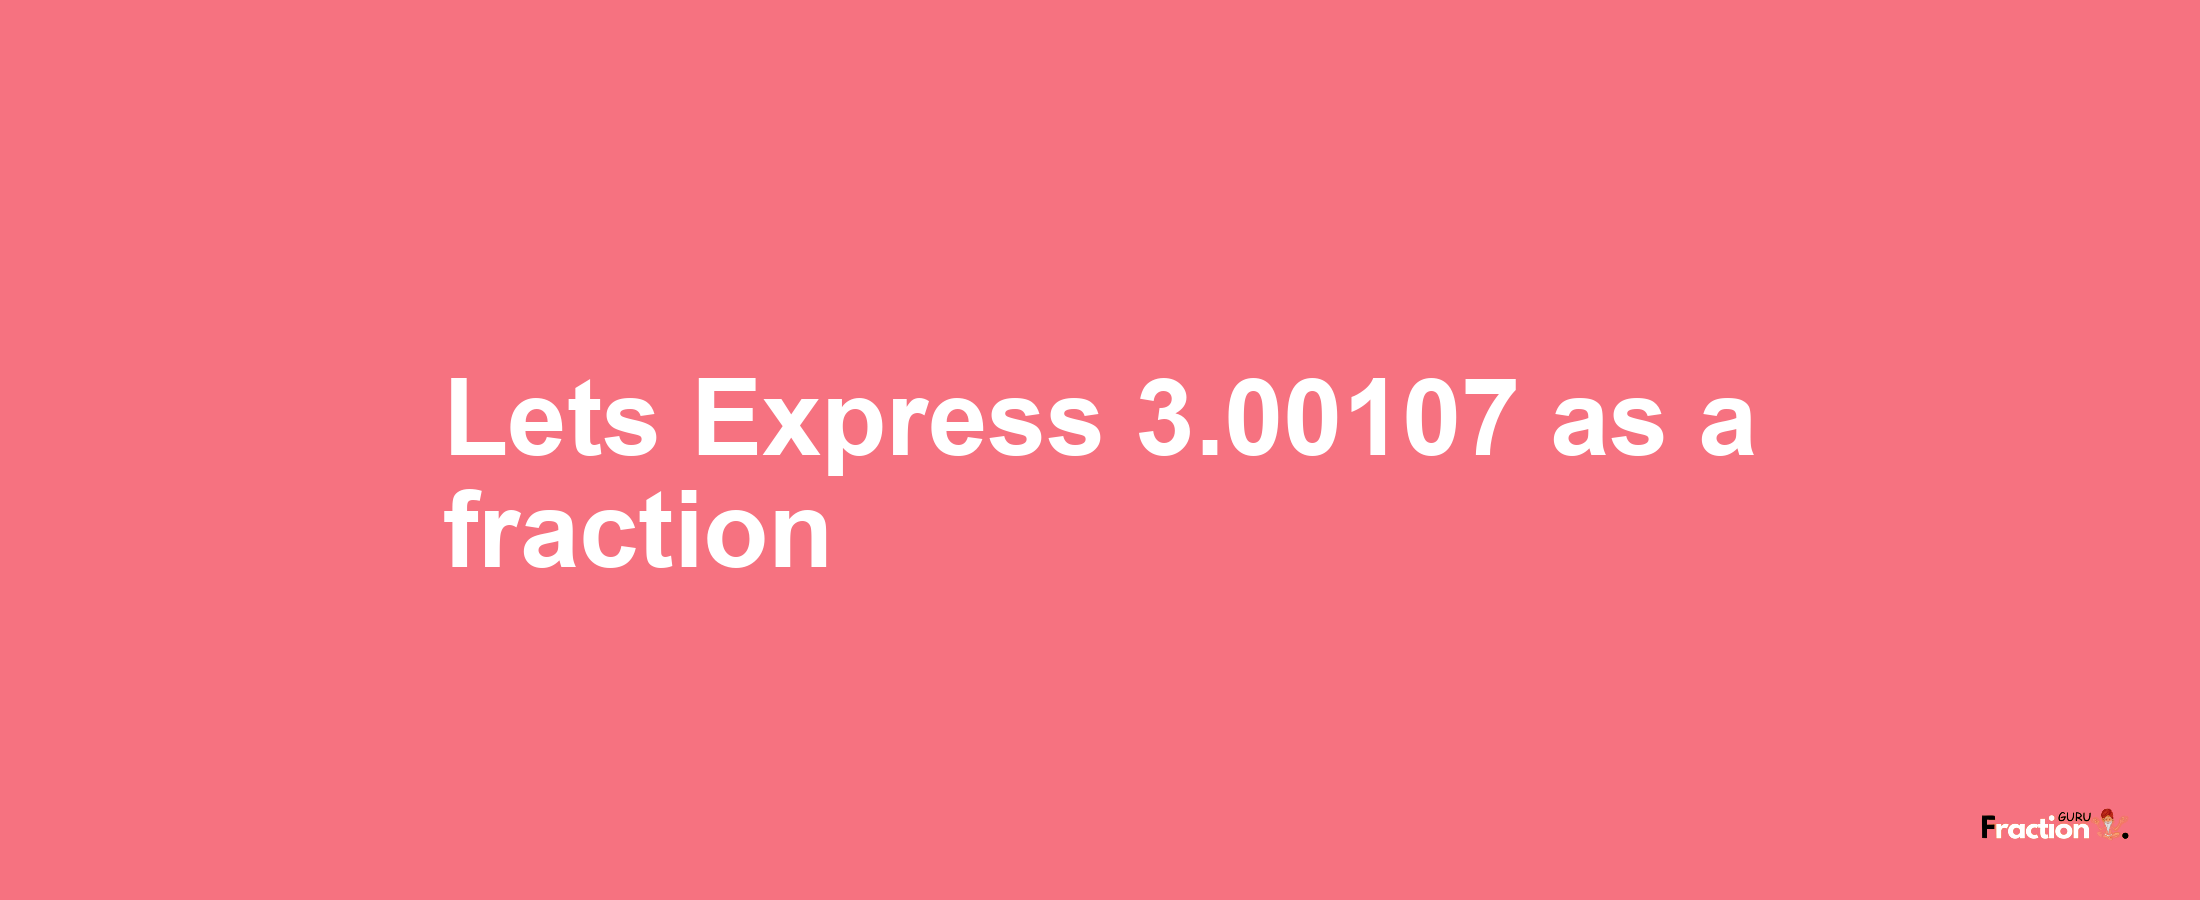 Lets Express 3.00107 as afraction